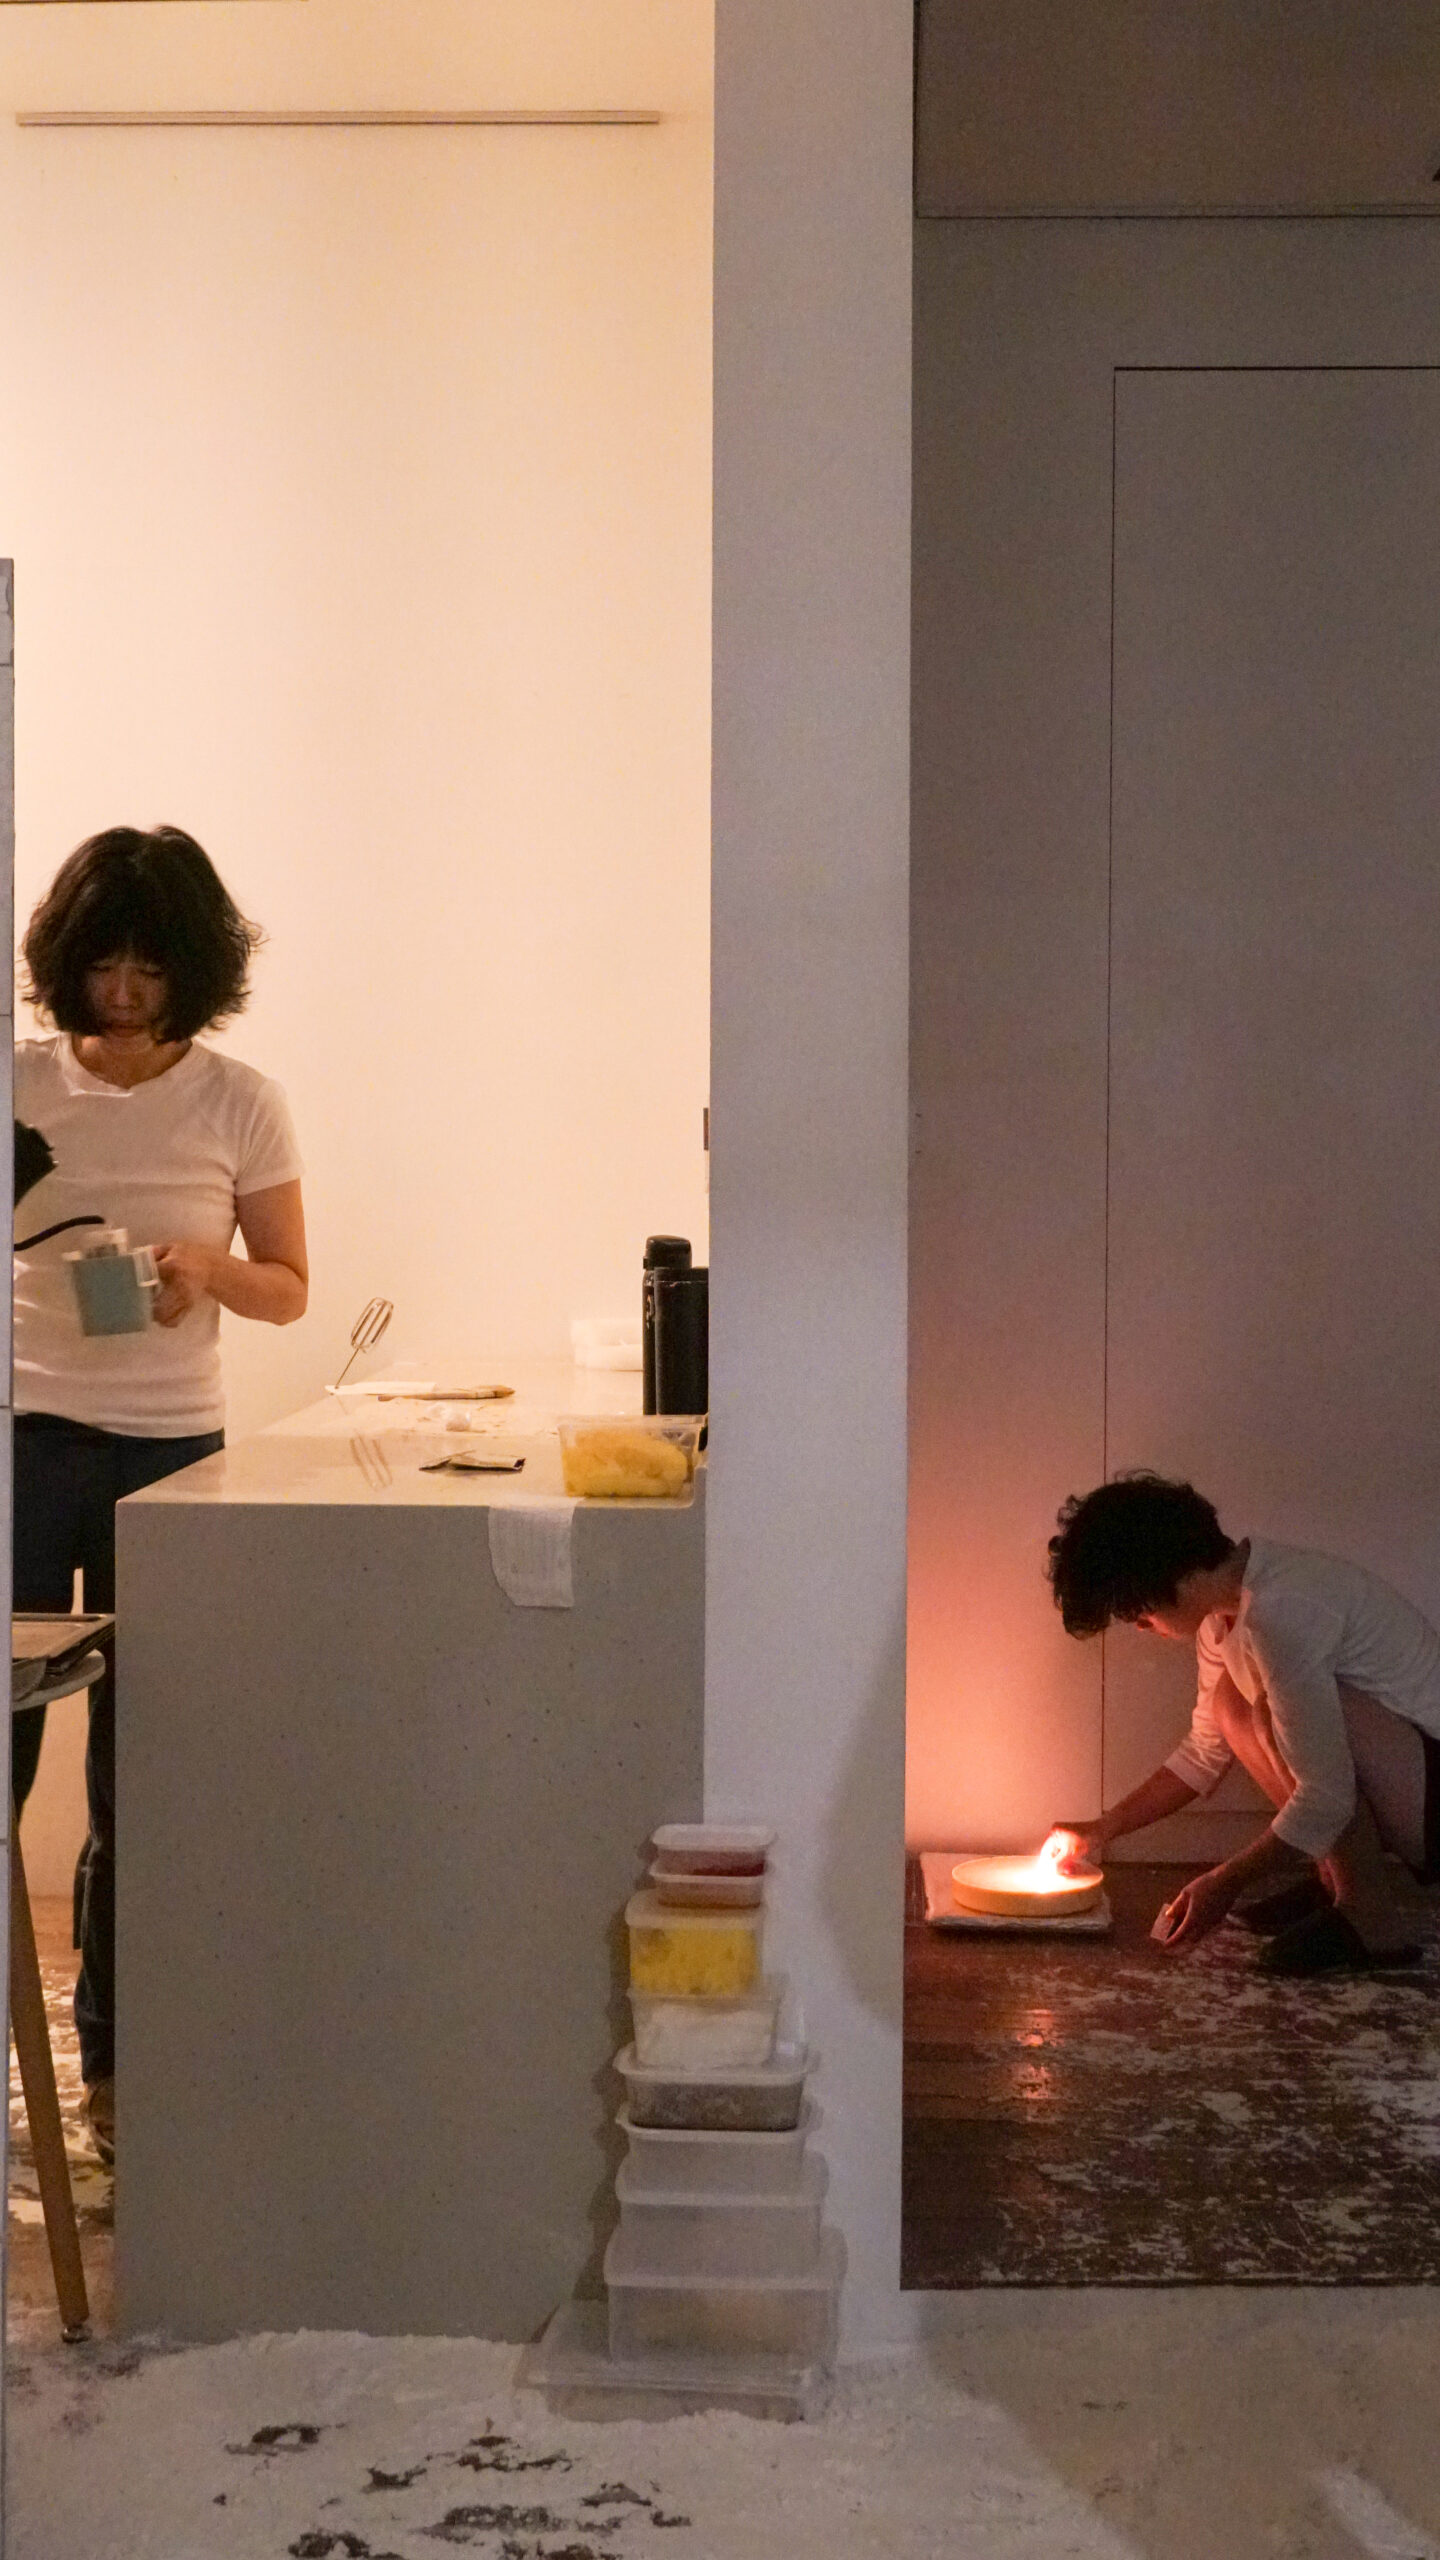 Two individuals are shown installing the exhibition. On the left petite femme stands to the left pouring water from a kettle into a cup. Separated by a wall, another figure is seen crouched installing another work of art in a dimmer room, the light from the artwork casts a warm glow.